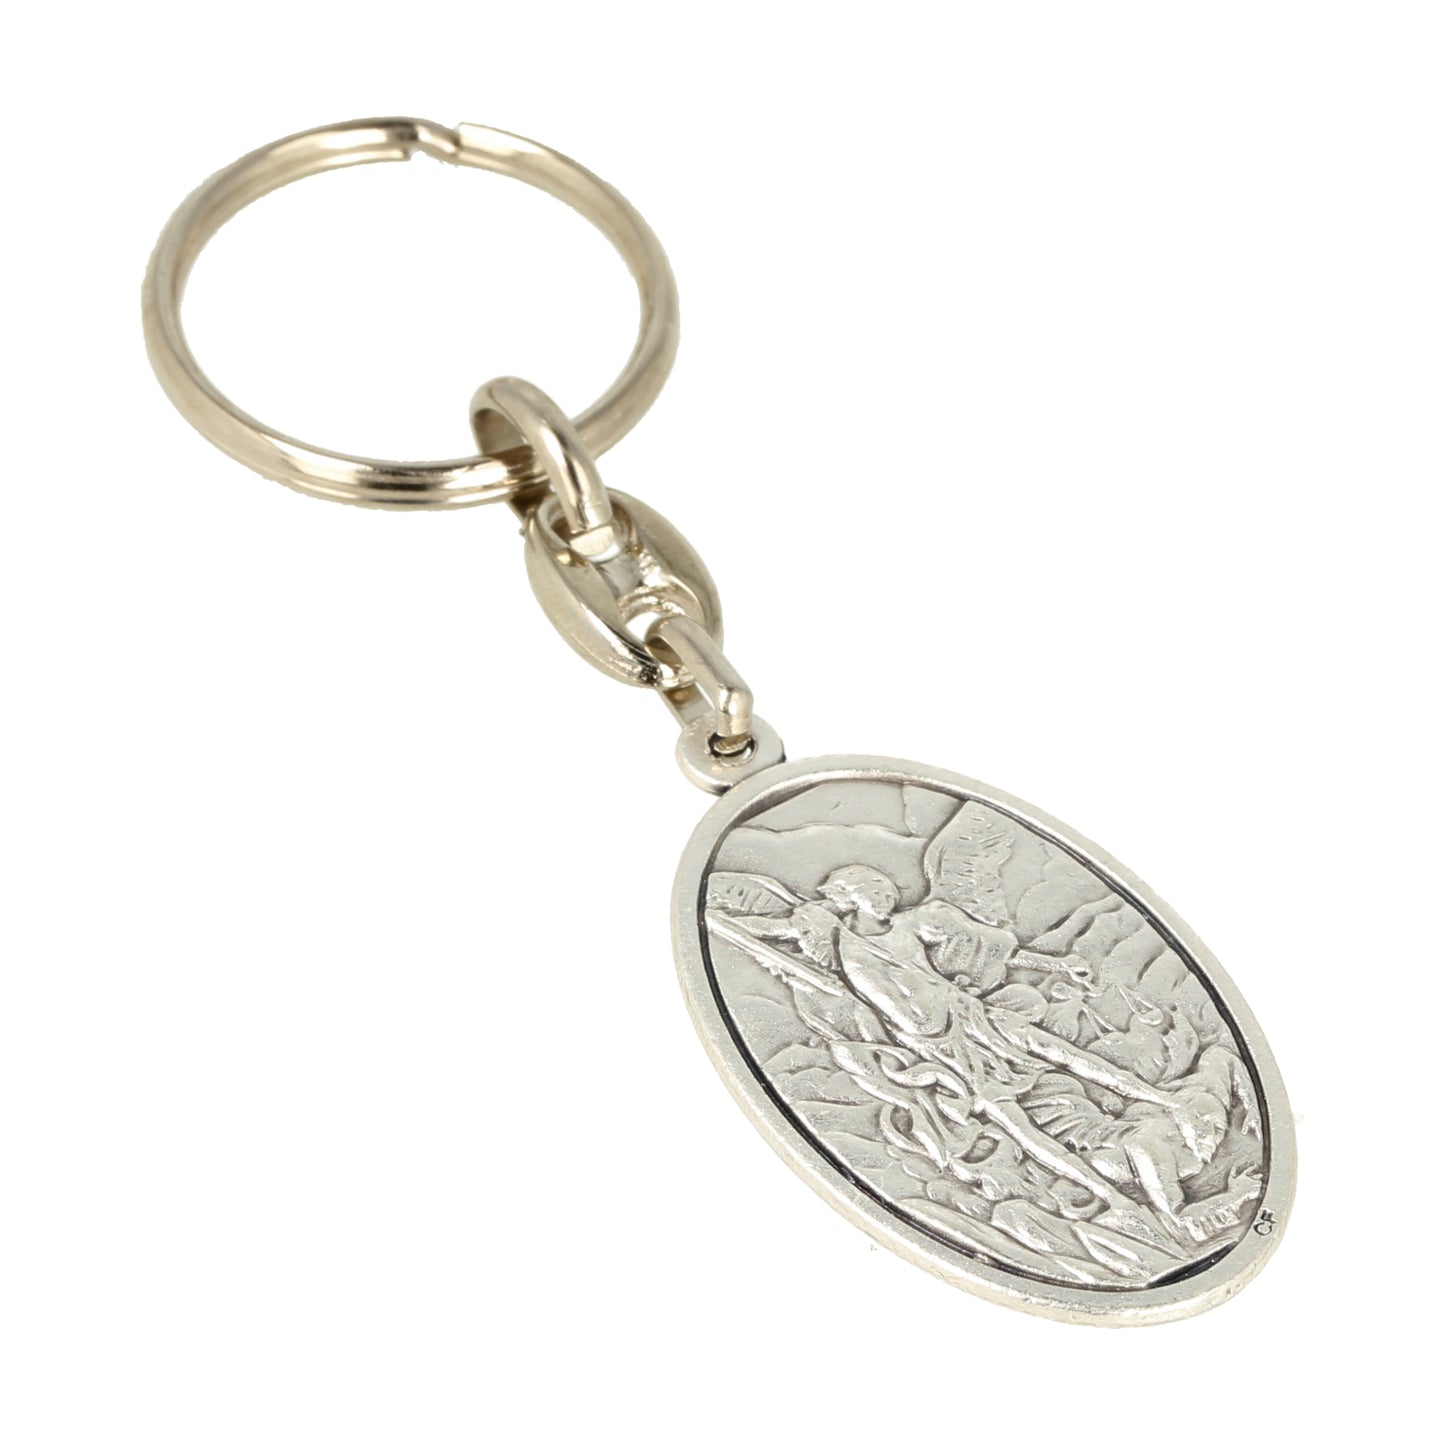 Keychain Guardian Angel Saint Michael Oval Grd. Souvenirs from Italy